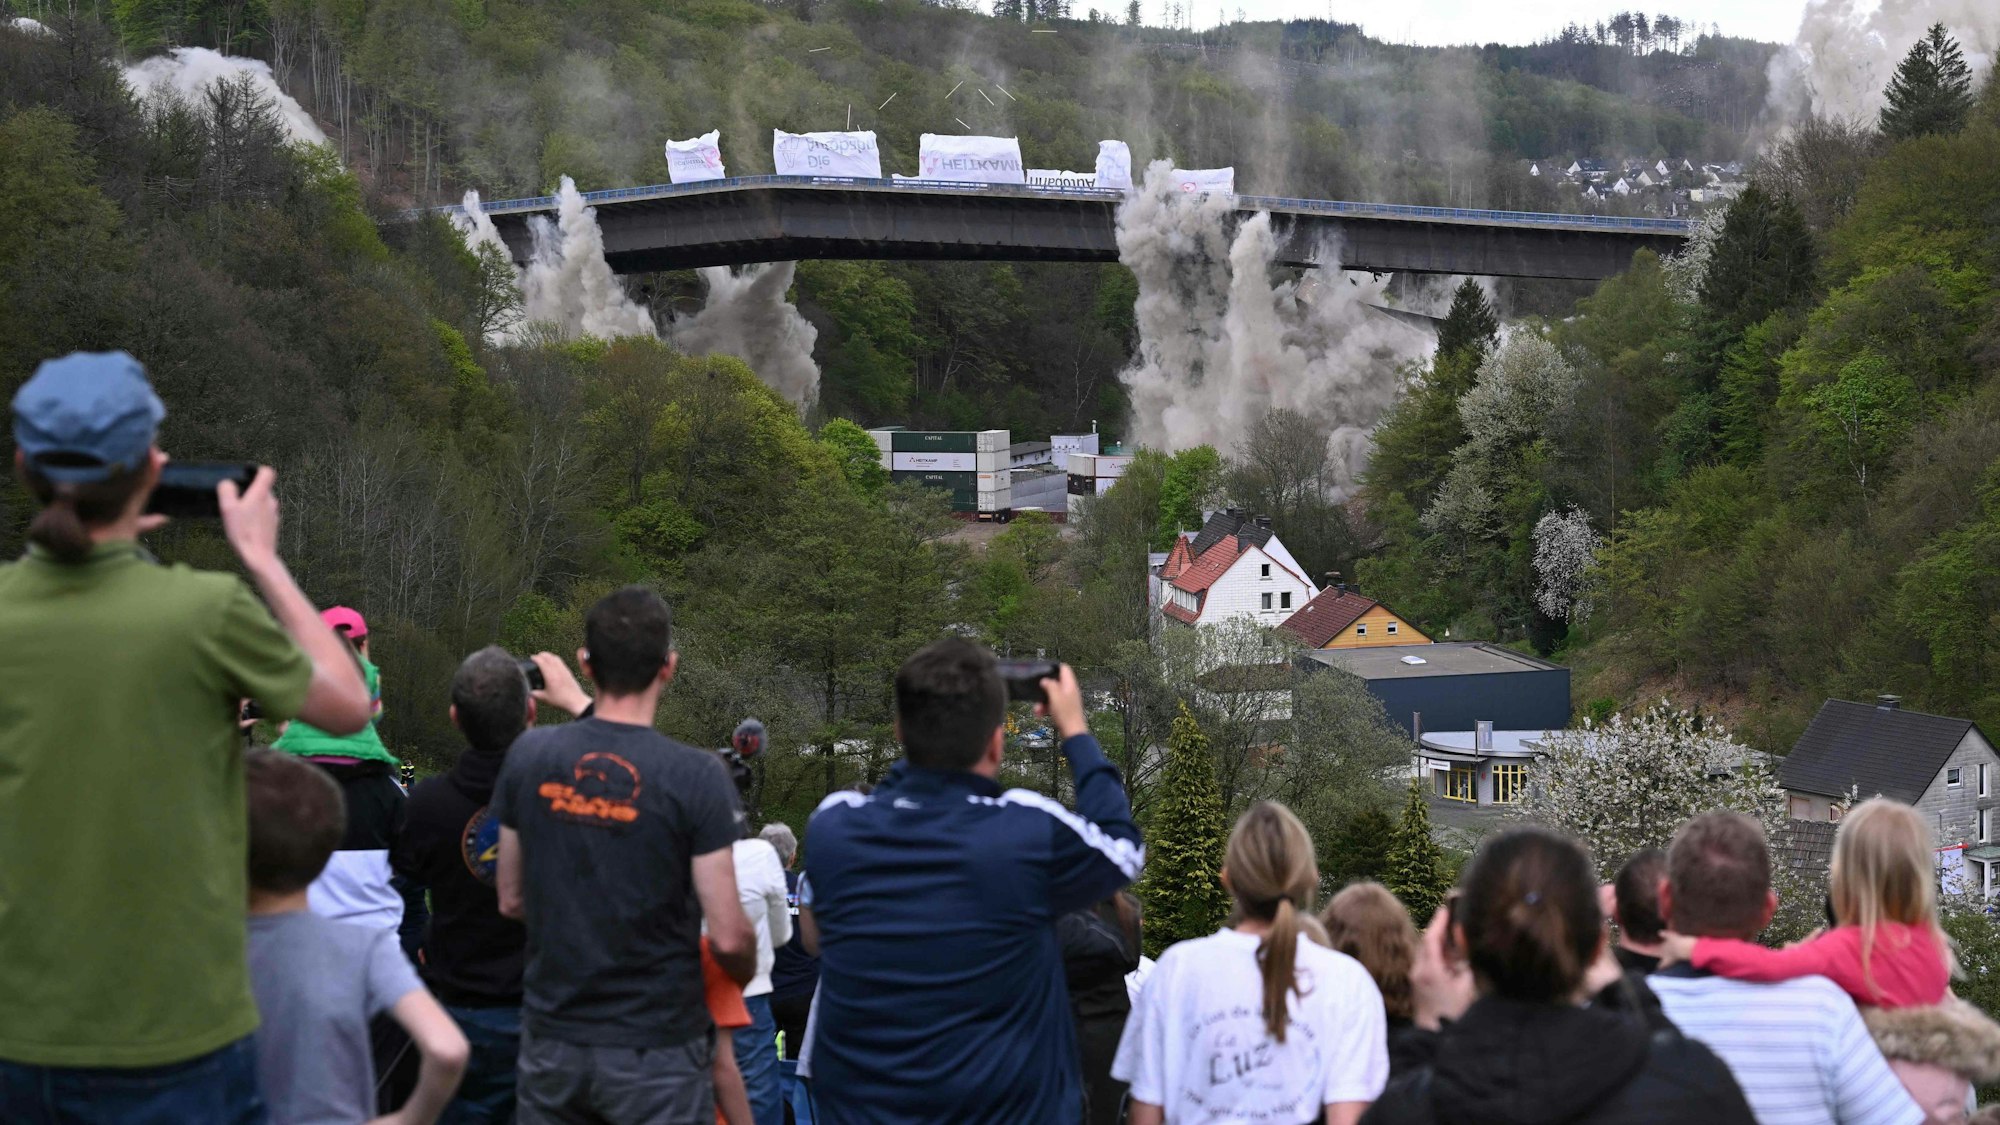 People take pictures of the Rahmede highway bridge during its blasting on May 7, 2023 on the A45 motorway, near Luedenscheid, western Germany. - During a routine inspection of the 453-metre-long Rahmede viaduct in December 2021, inspectors discovered deformations in the steel wall that could affect the bridge's load-bearing capacity. According to the motorway company, a new construction will take at least five years. (Photo by INA FASSBENDER / AFP)